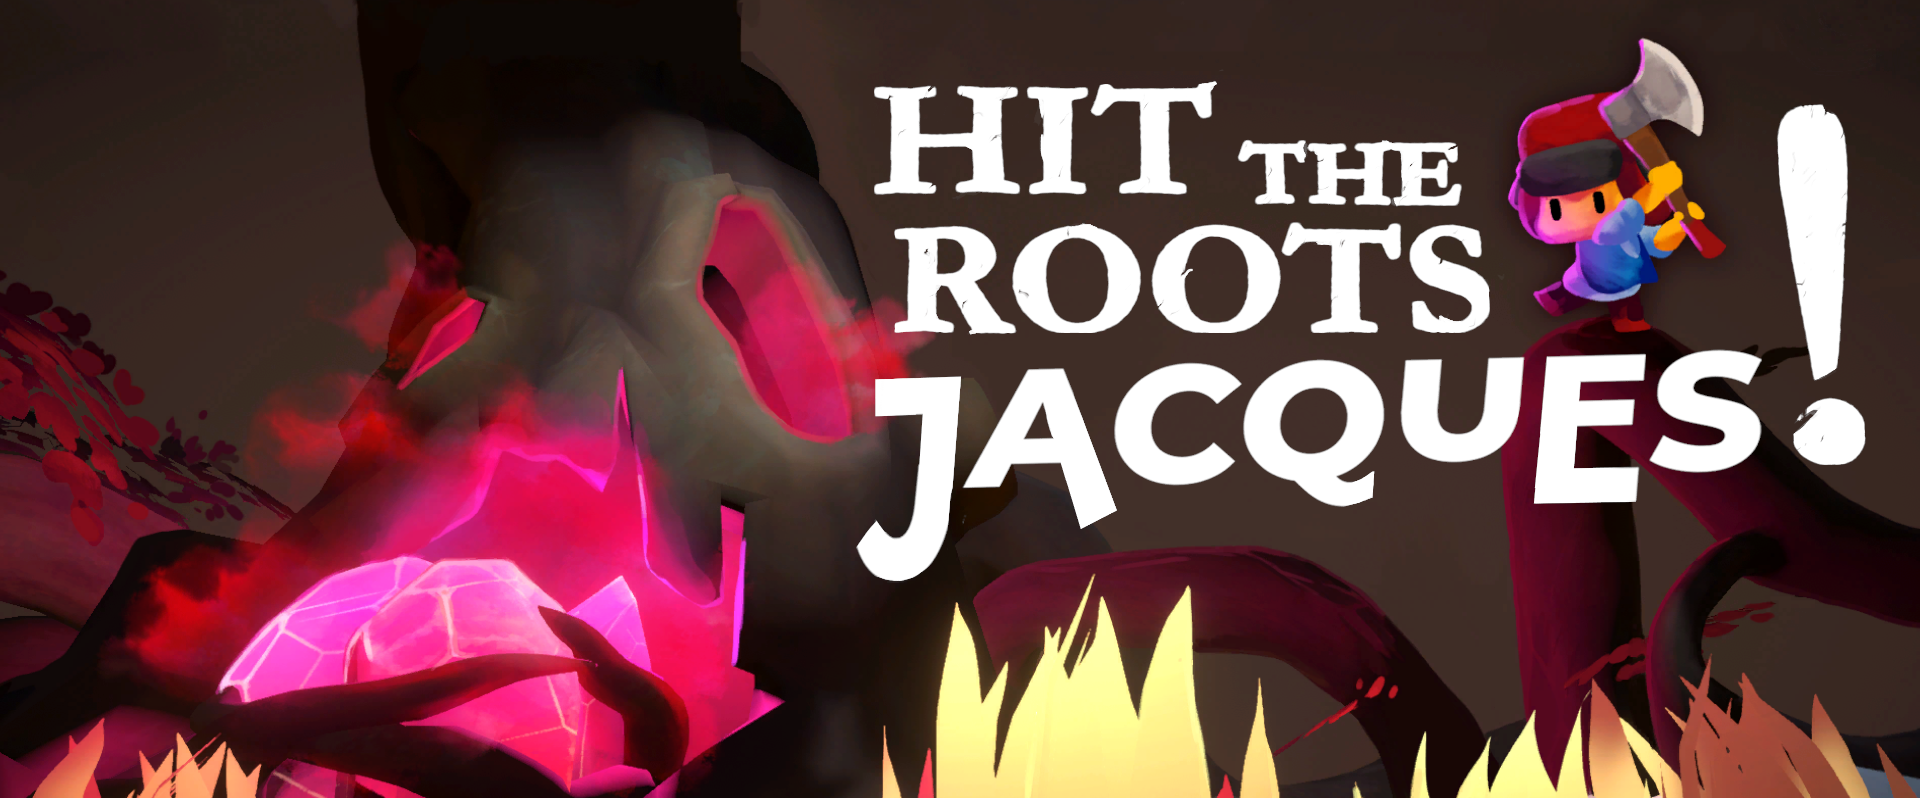 Hit the Roots Jacques !